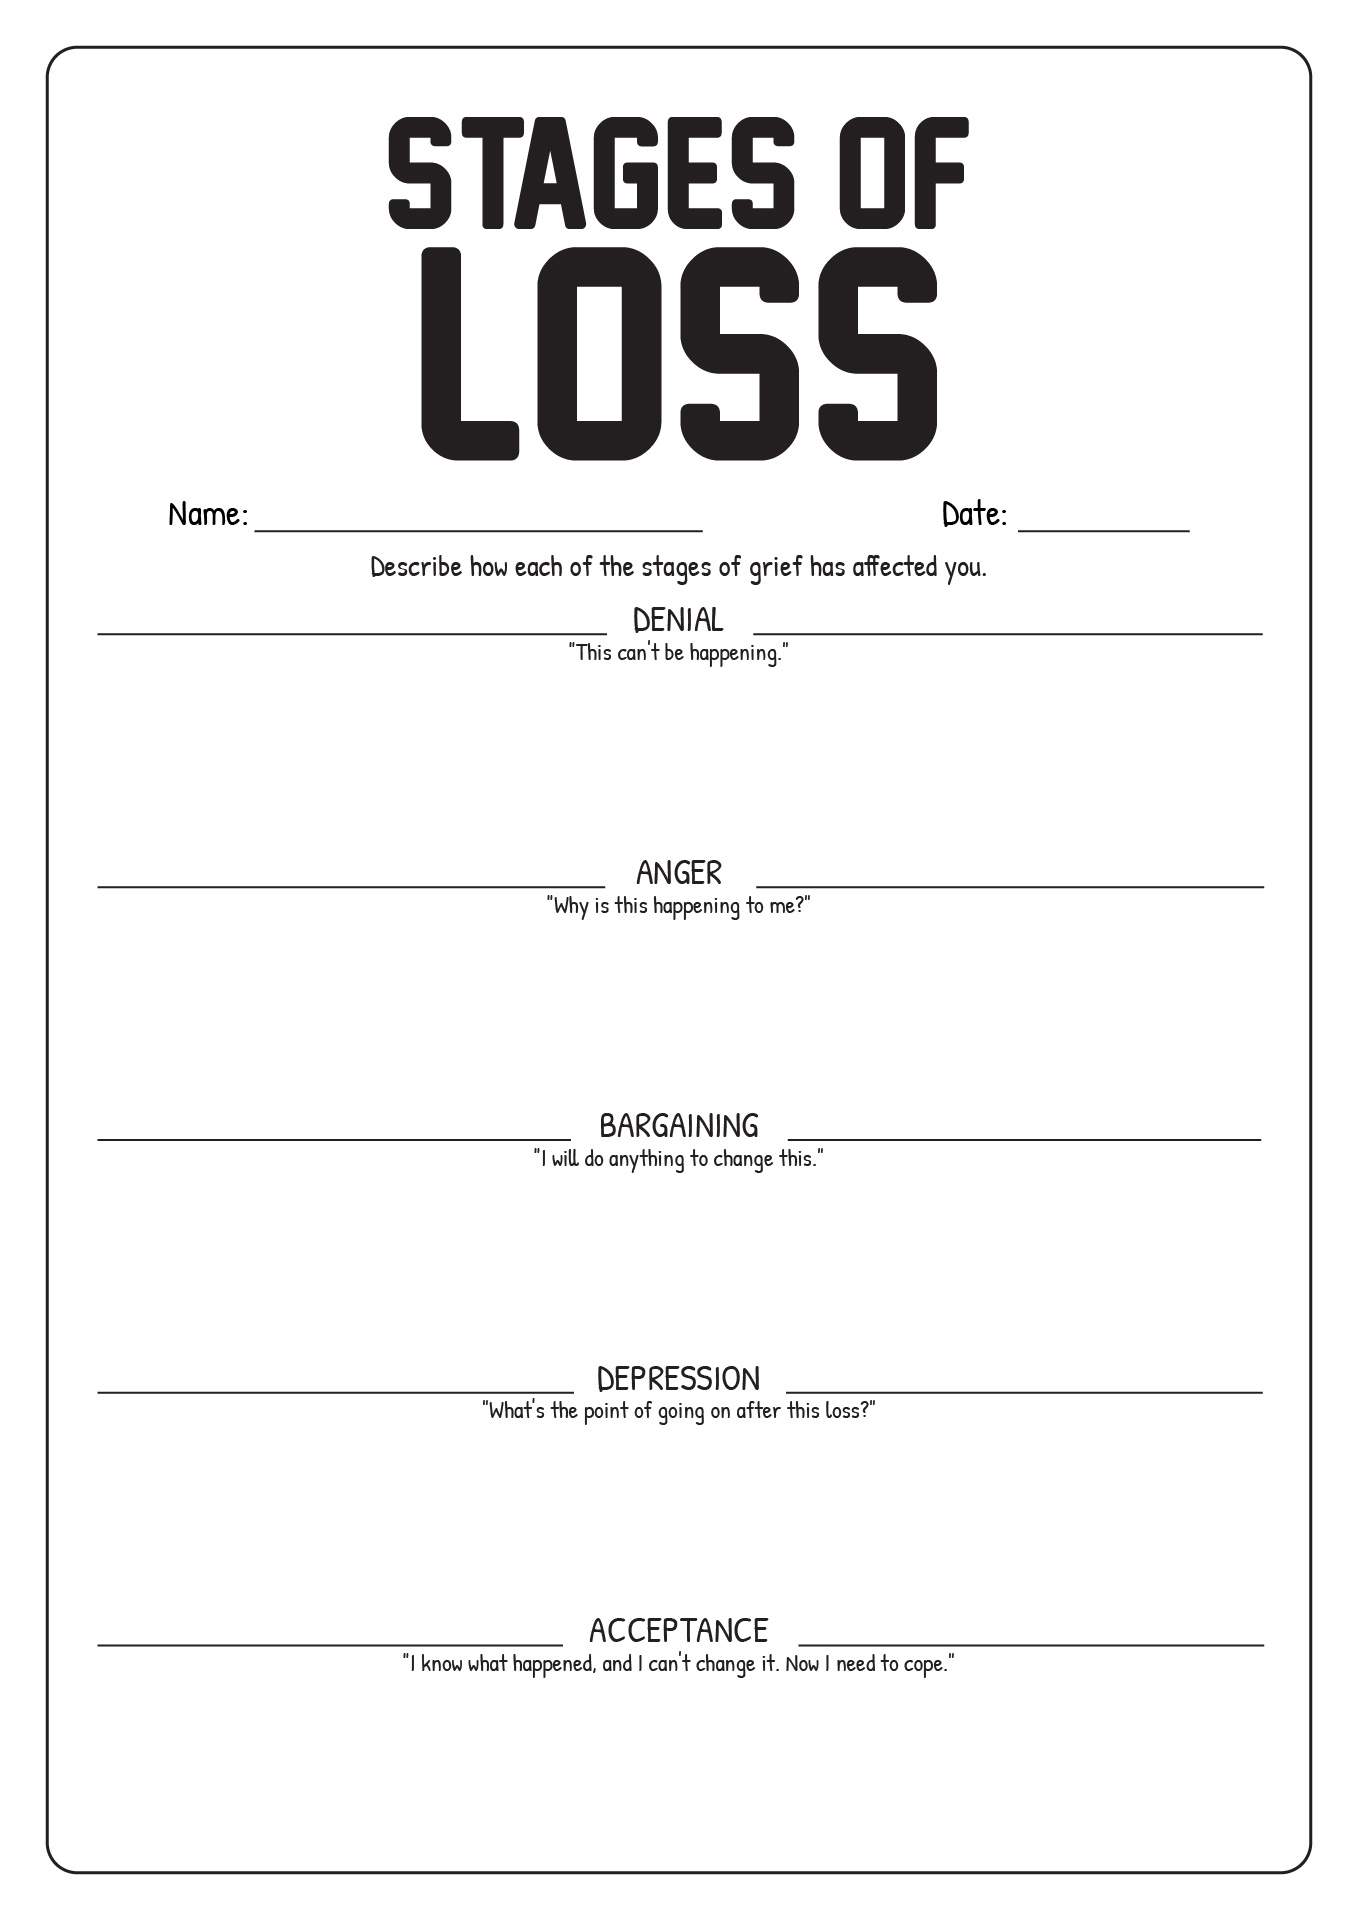 5 Stages of Loss Worksheets Image